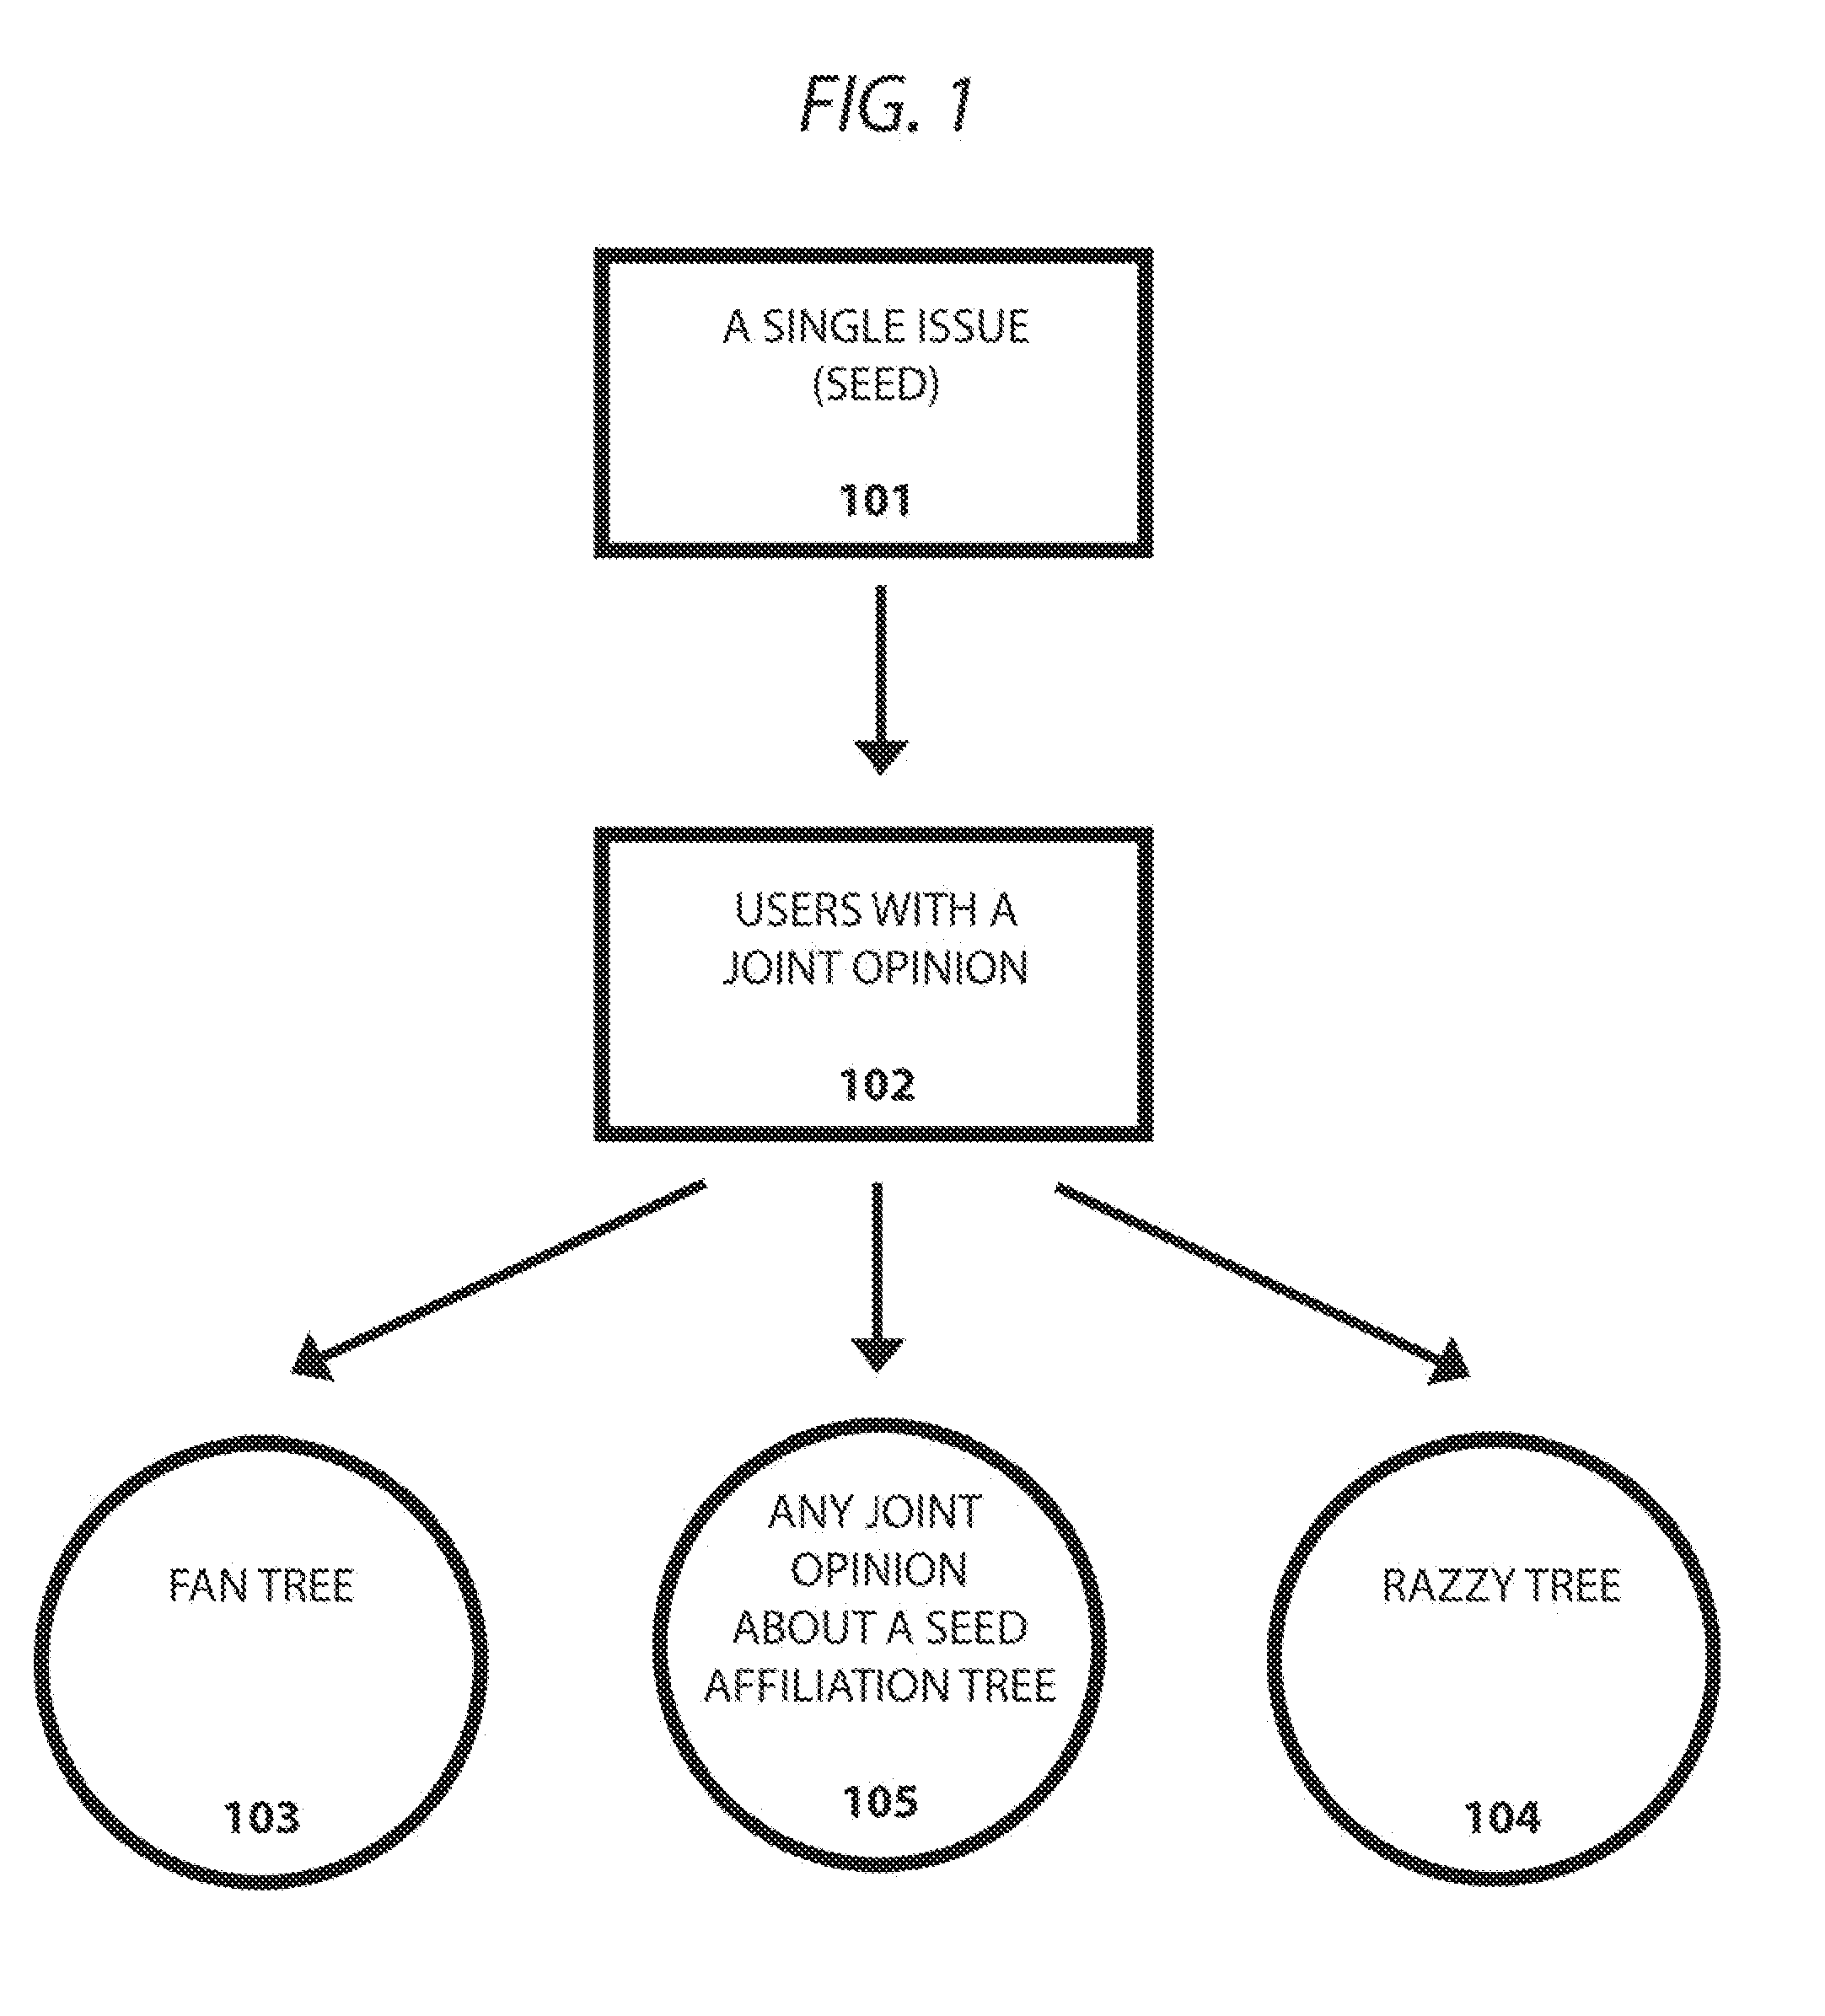 Apparatus and Method for Measuring Social Impact